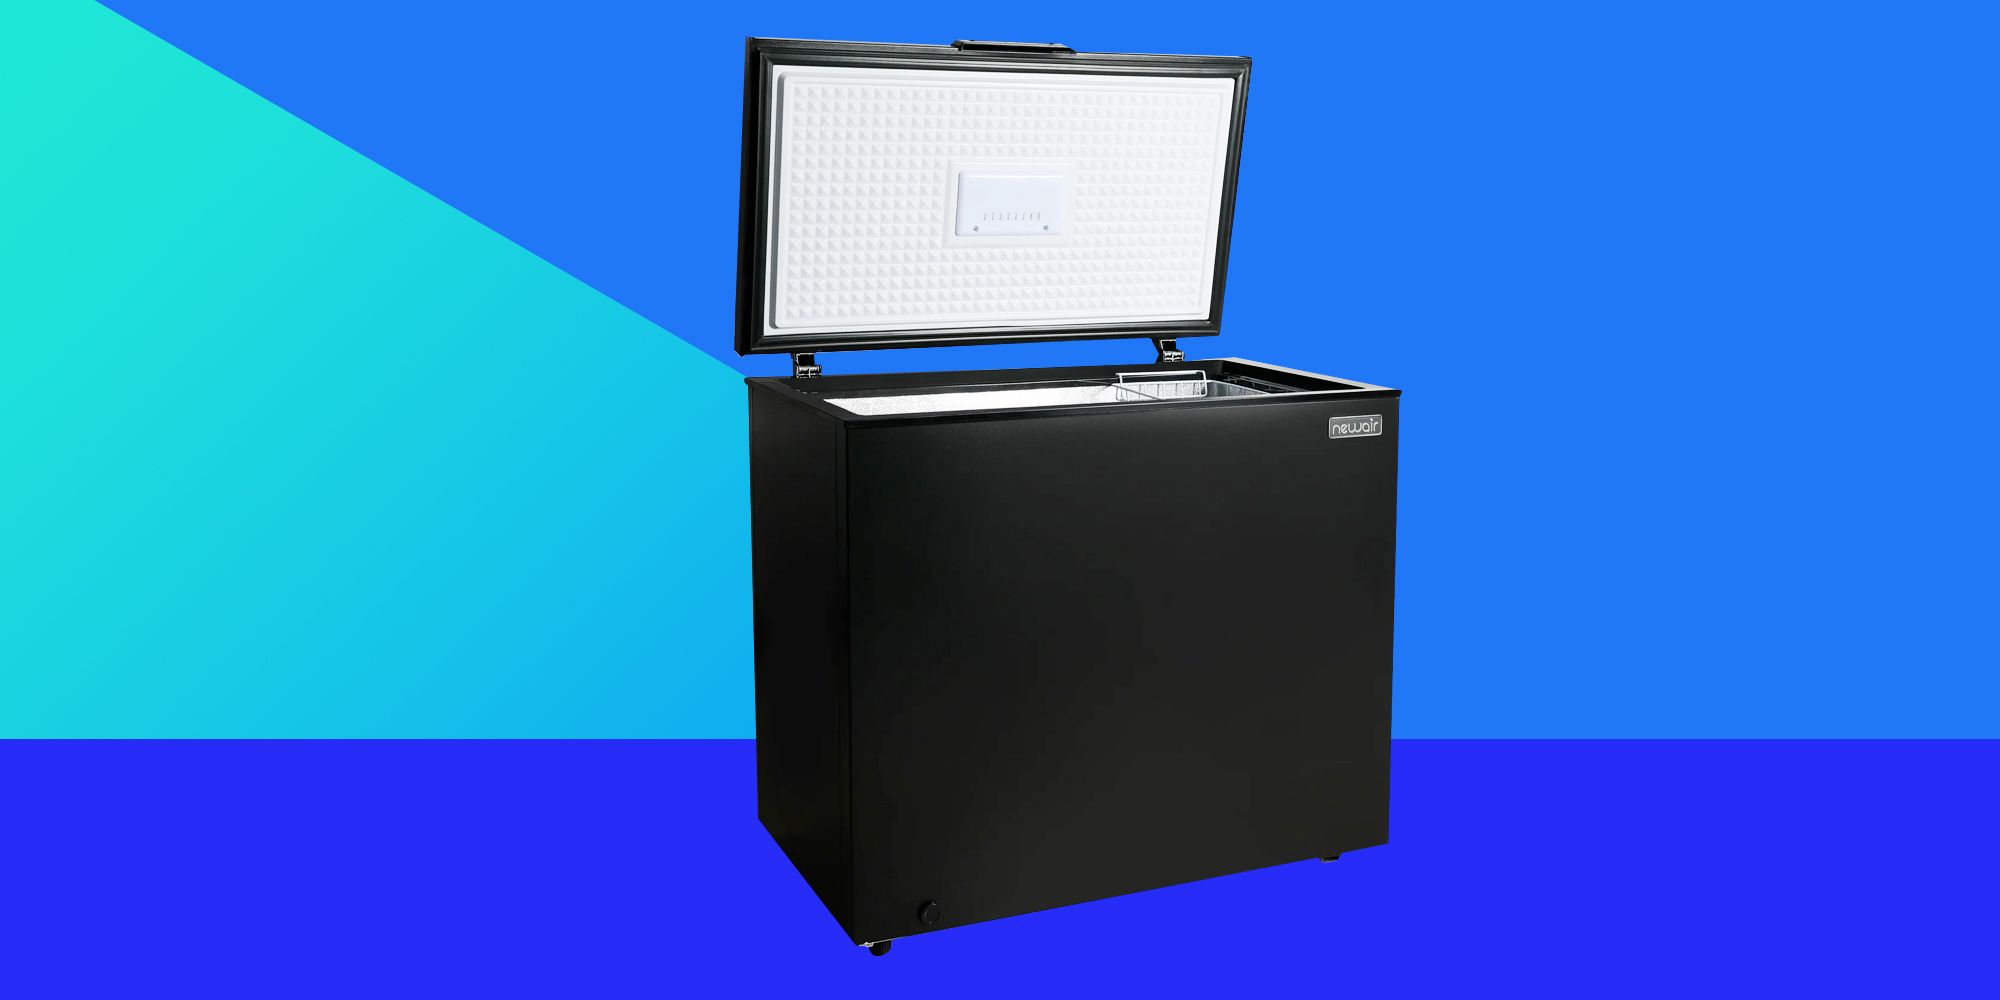 Chest Freezer The Size Perfect The Color is Just Right For My Kitchen Black New 